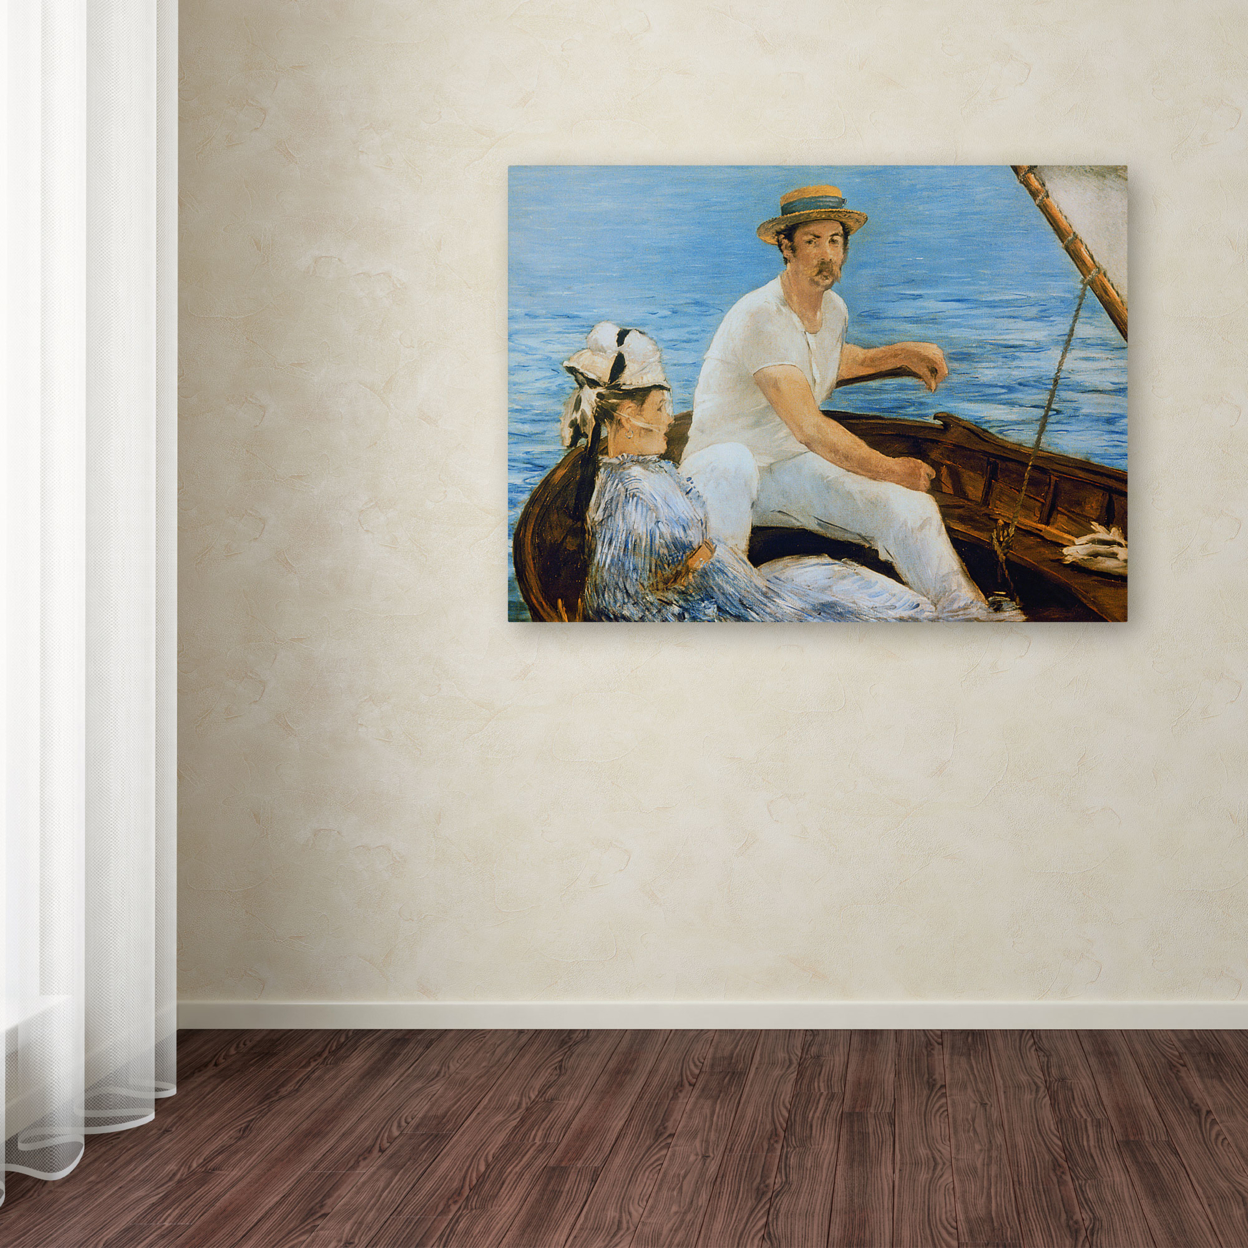 Edouard Manet 'Boating 1874' Canvas Wall Art 35 X 47 Inches